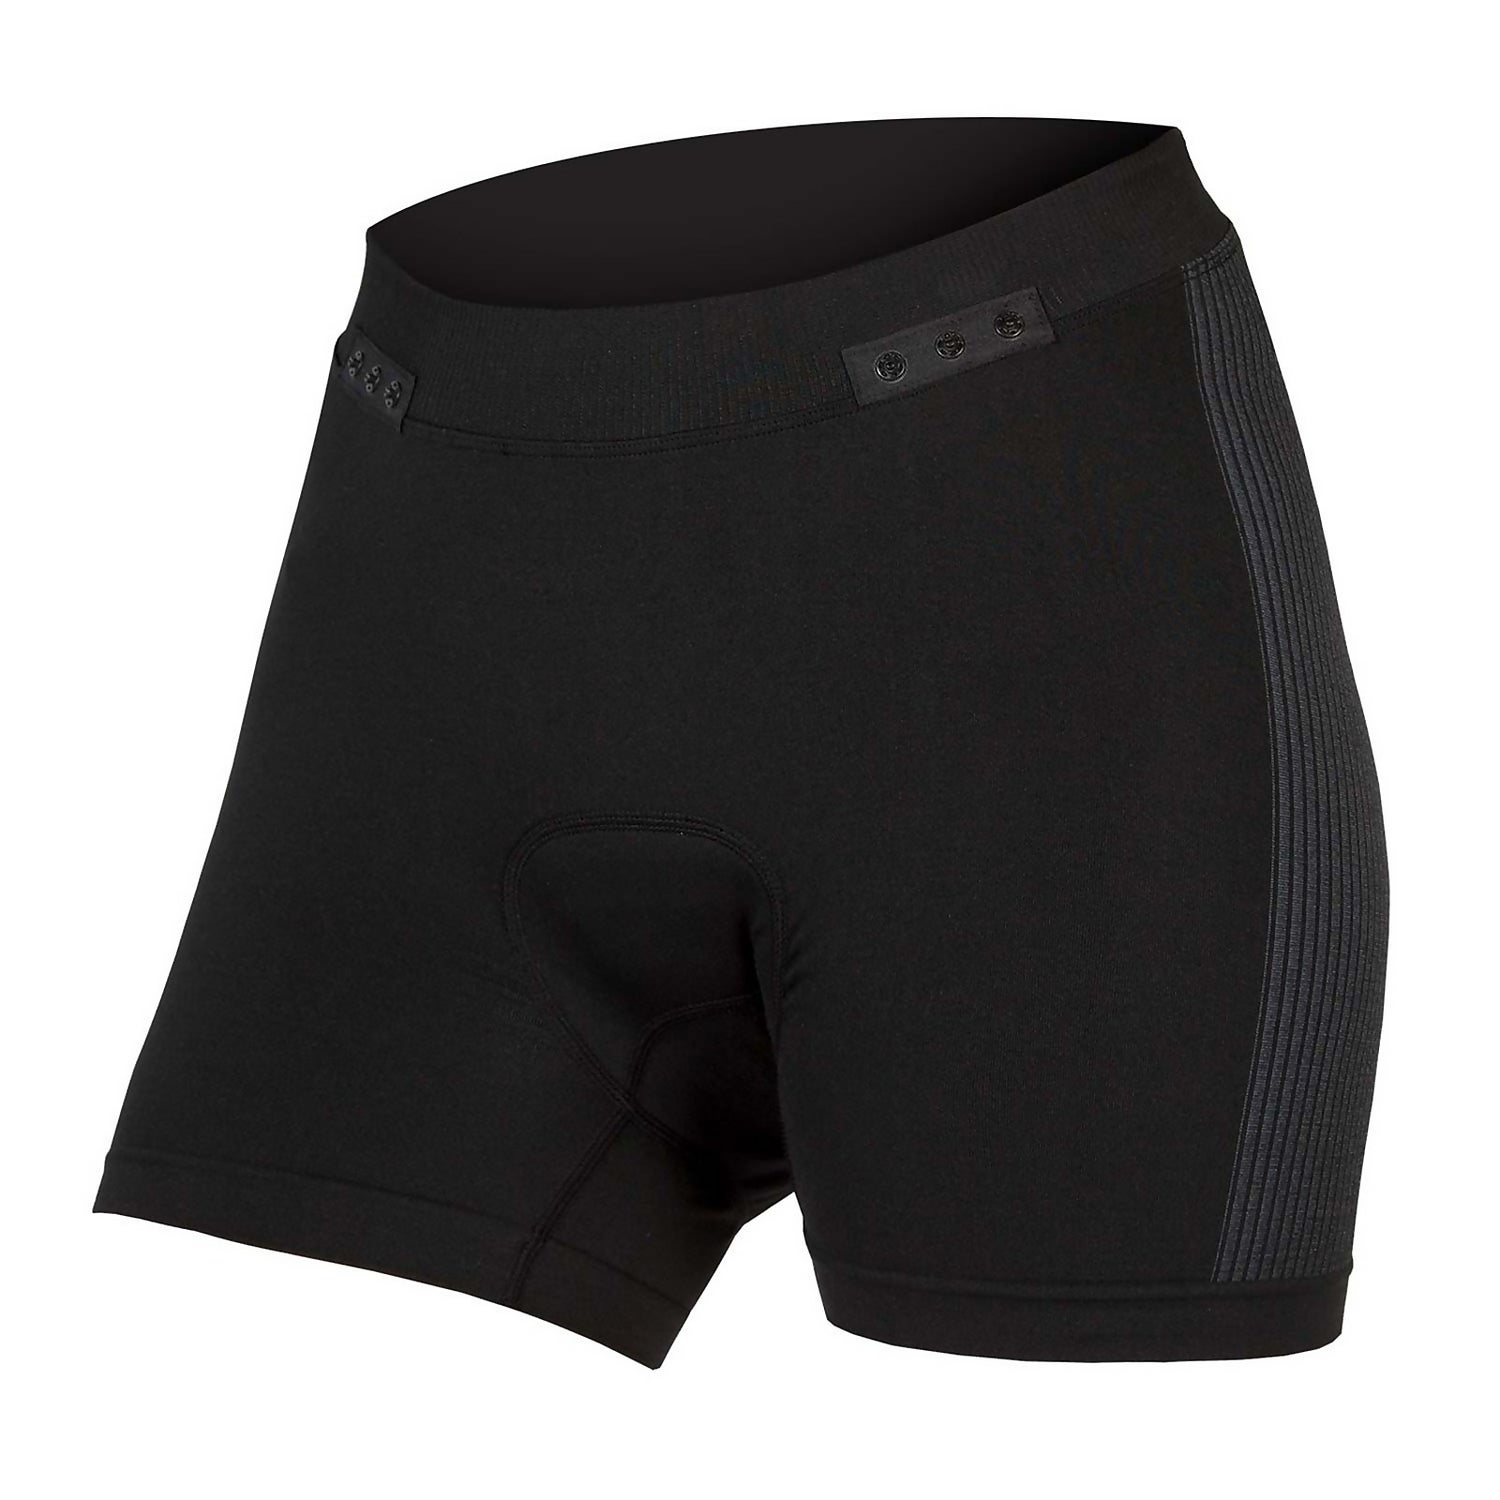 Women's Engineered Padded Boxer with Clickfast - Black - XL